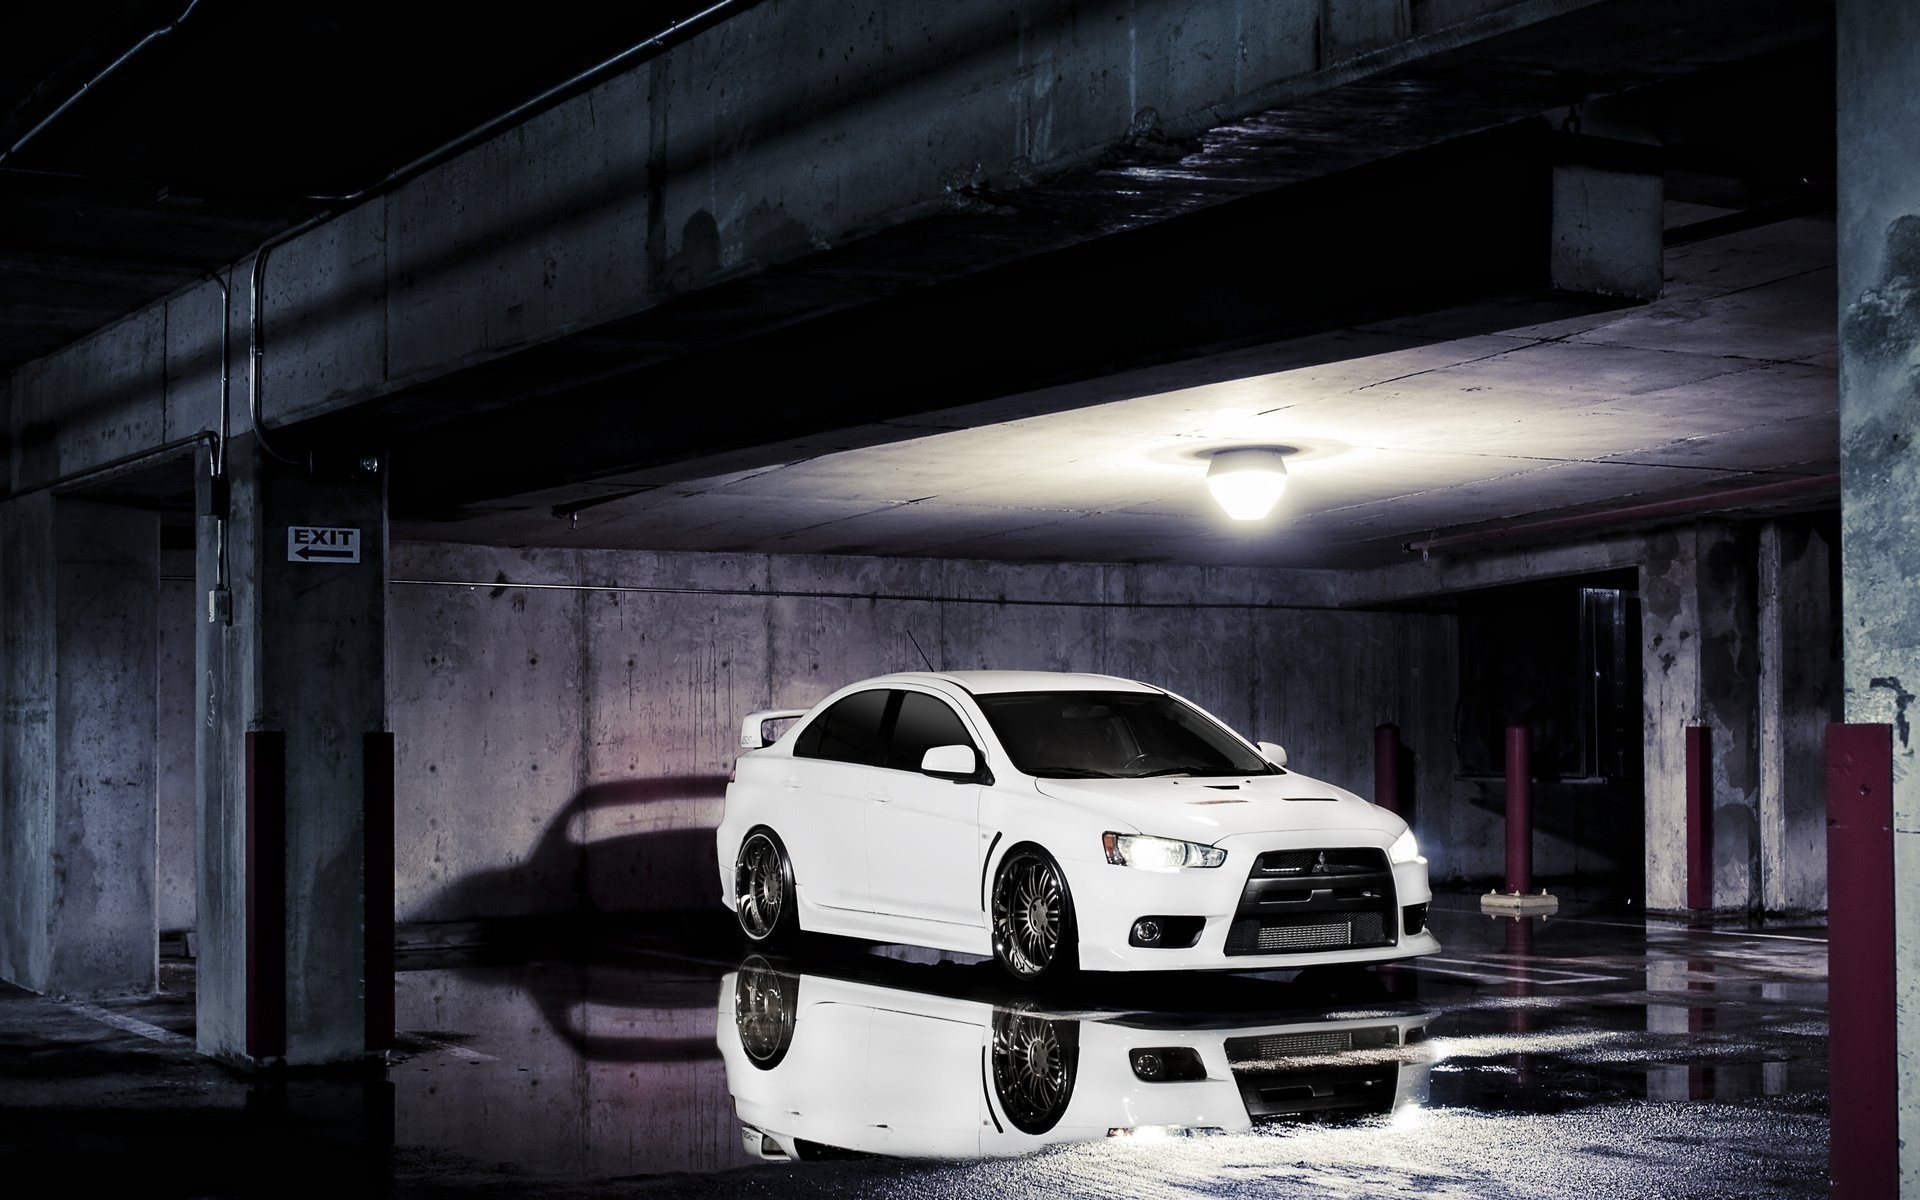 Evo X iPhone Wallpaper 46 images